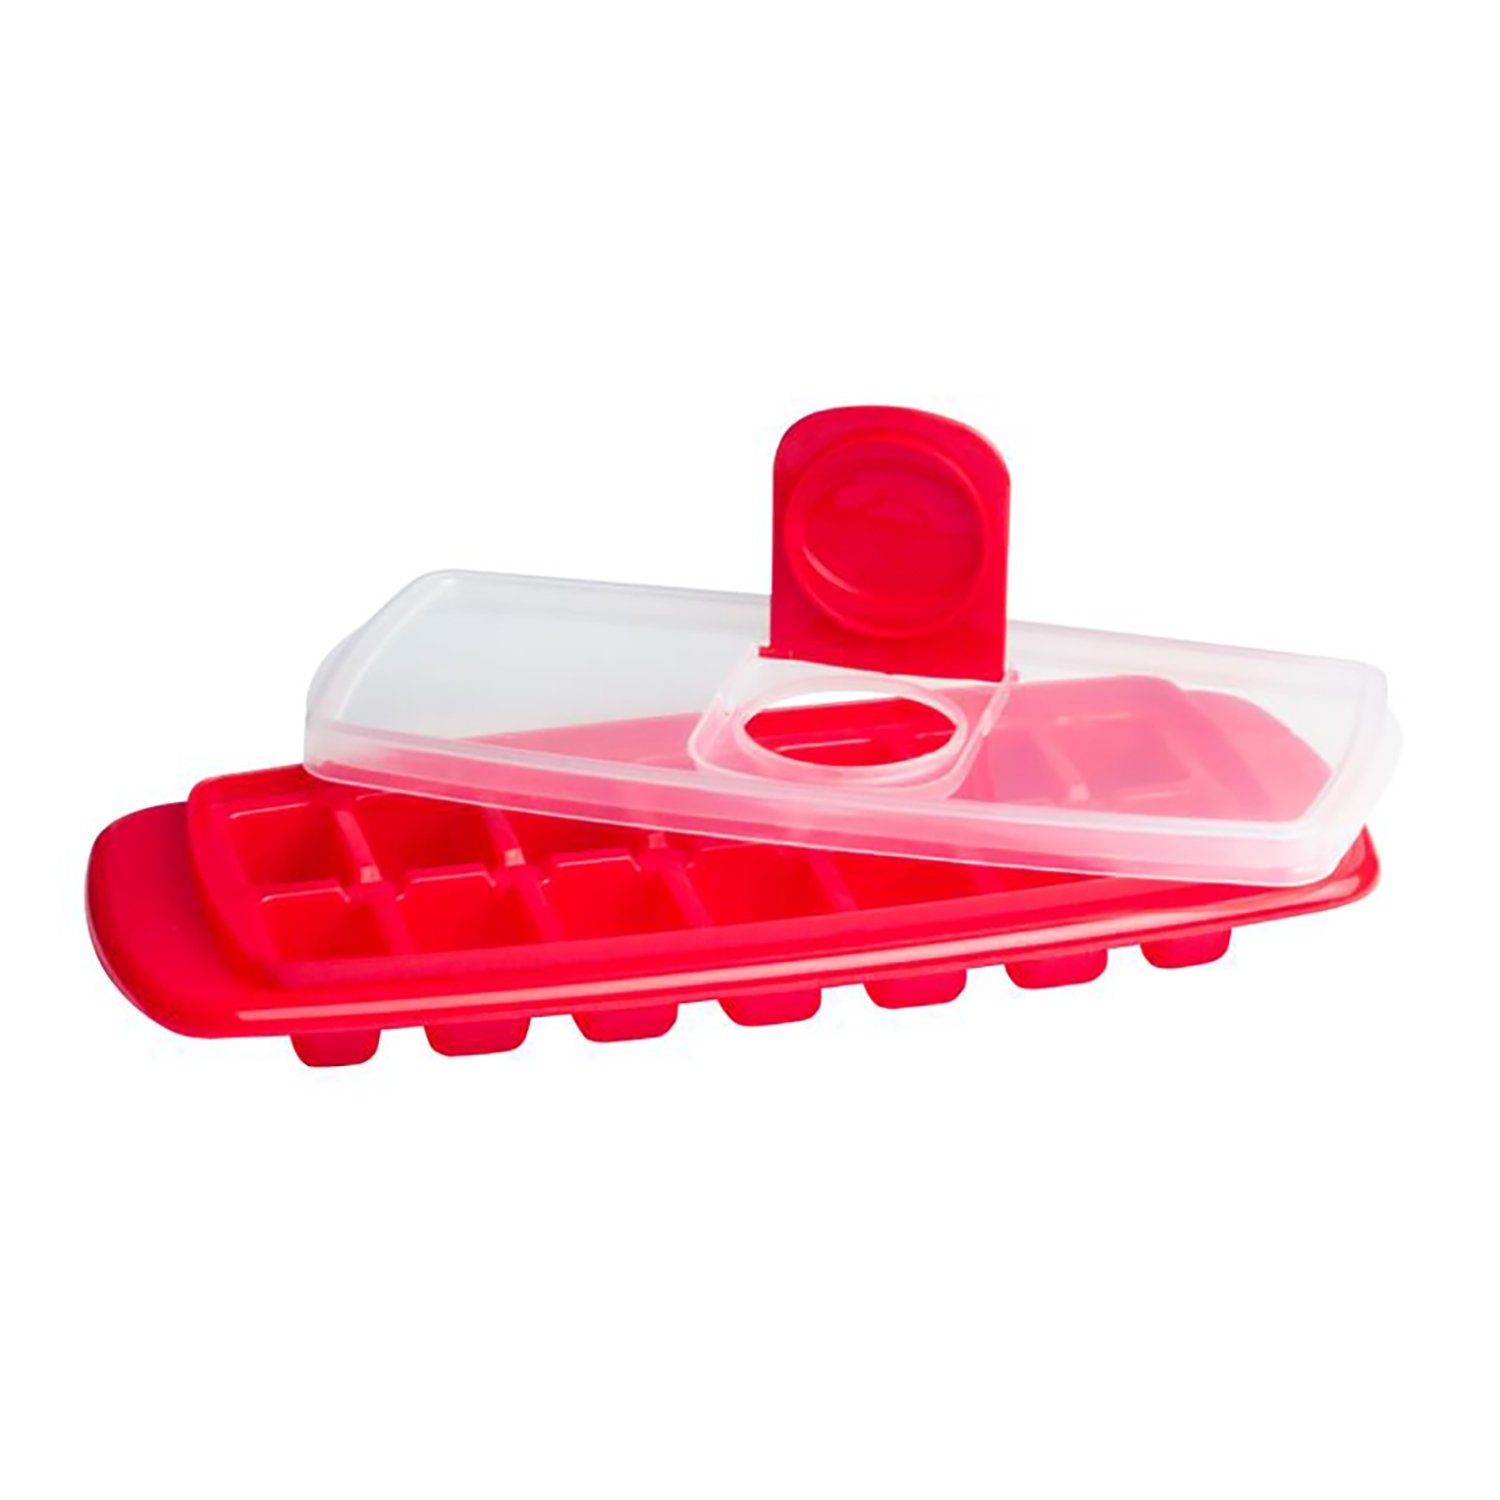 https://cdn.shopify.com/s/files/1/1416/1268/products/cuisena-ice-cube-tray-with-lid-red-30905506070722.jpg?v=1648208565&width=1500